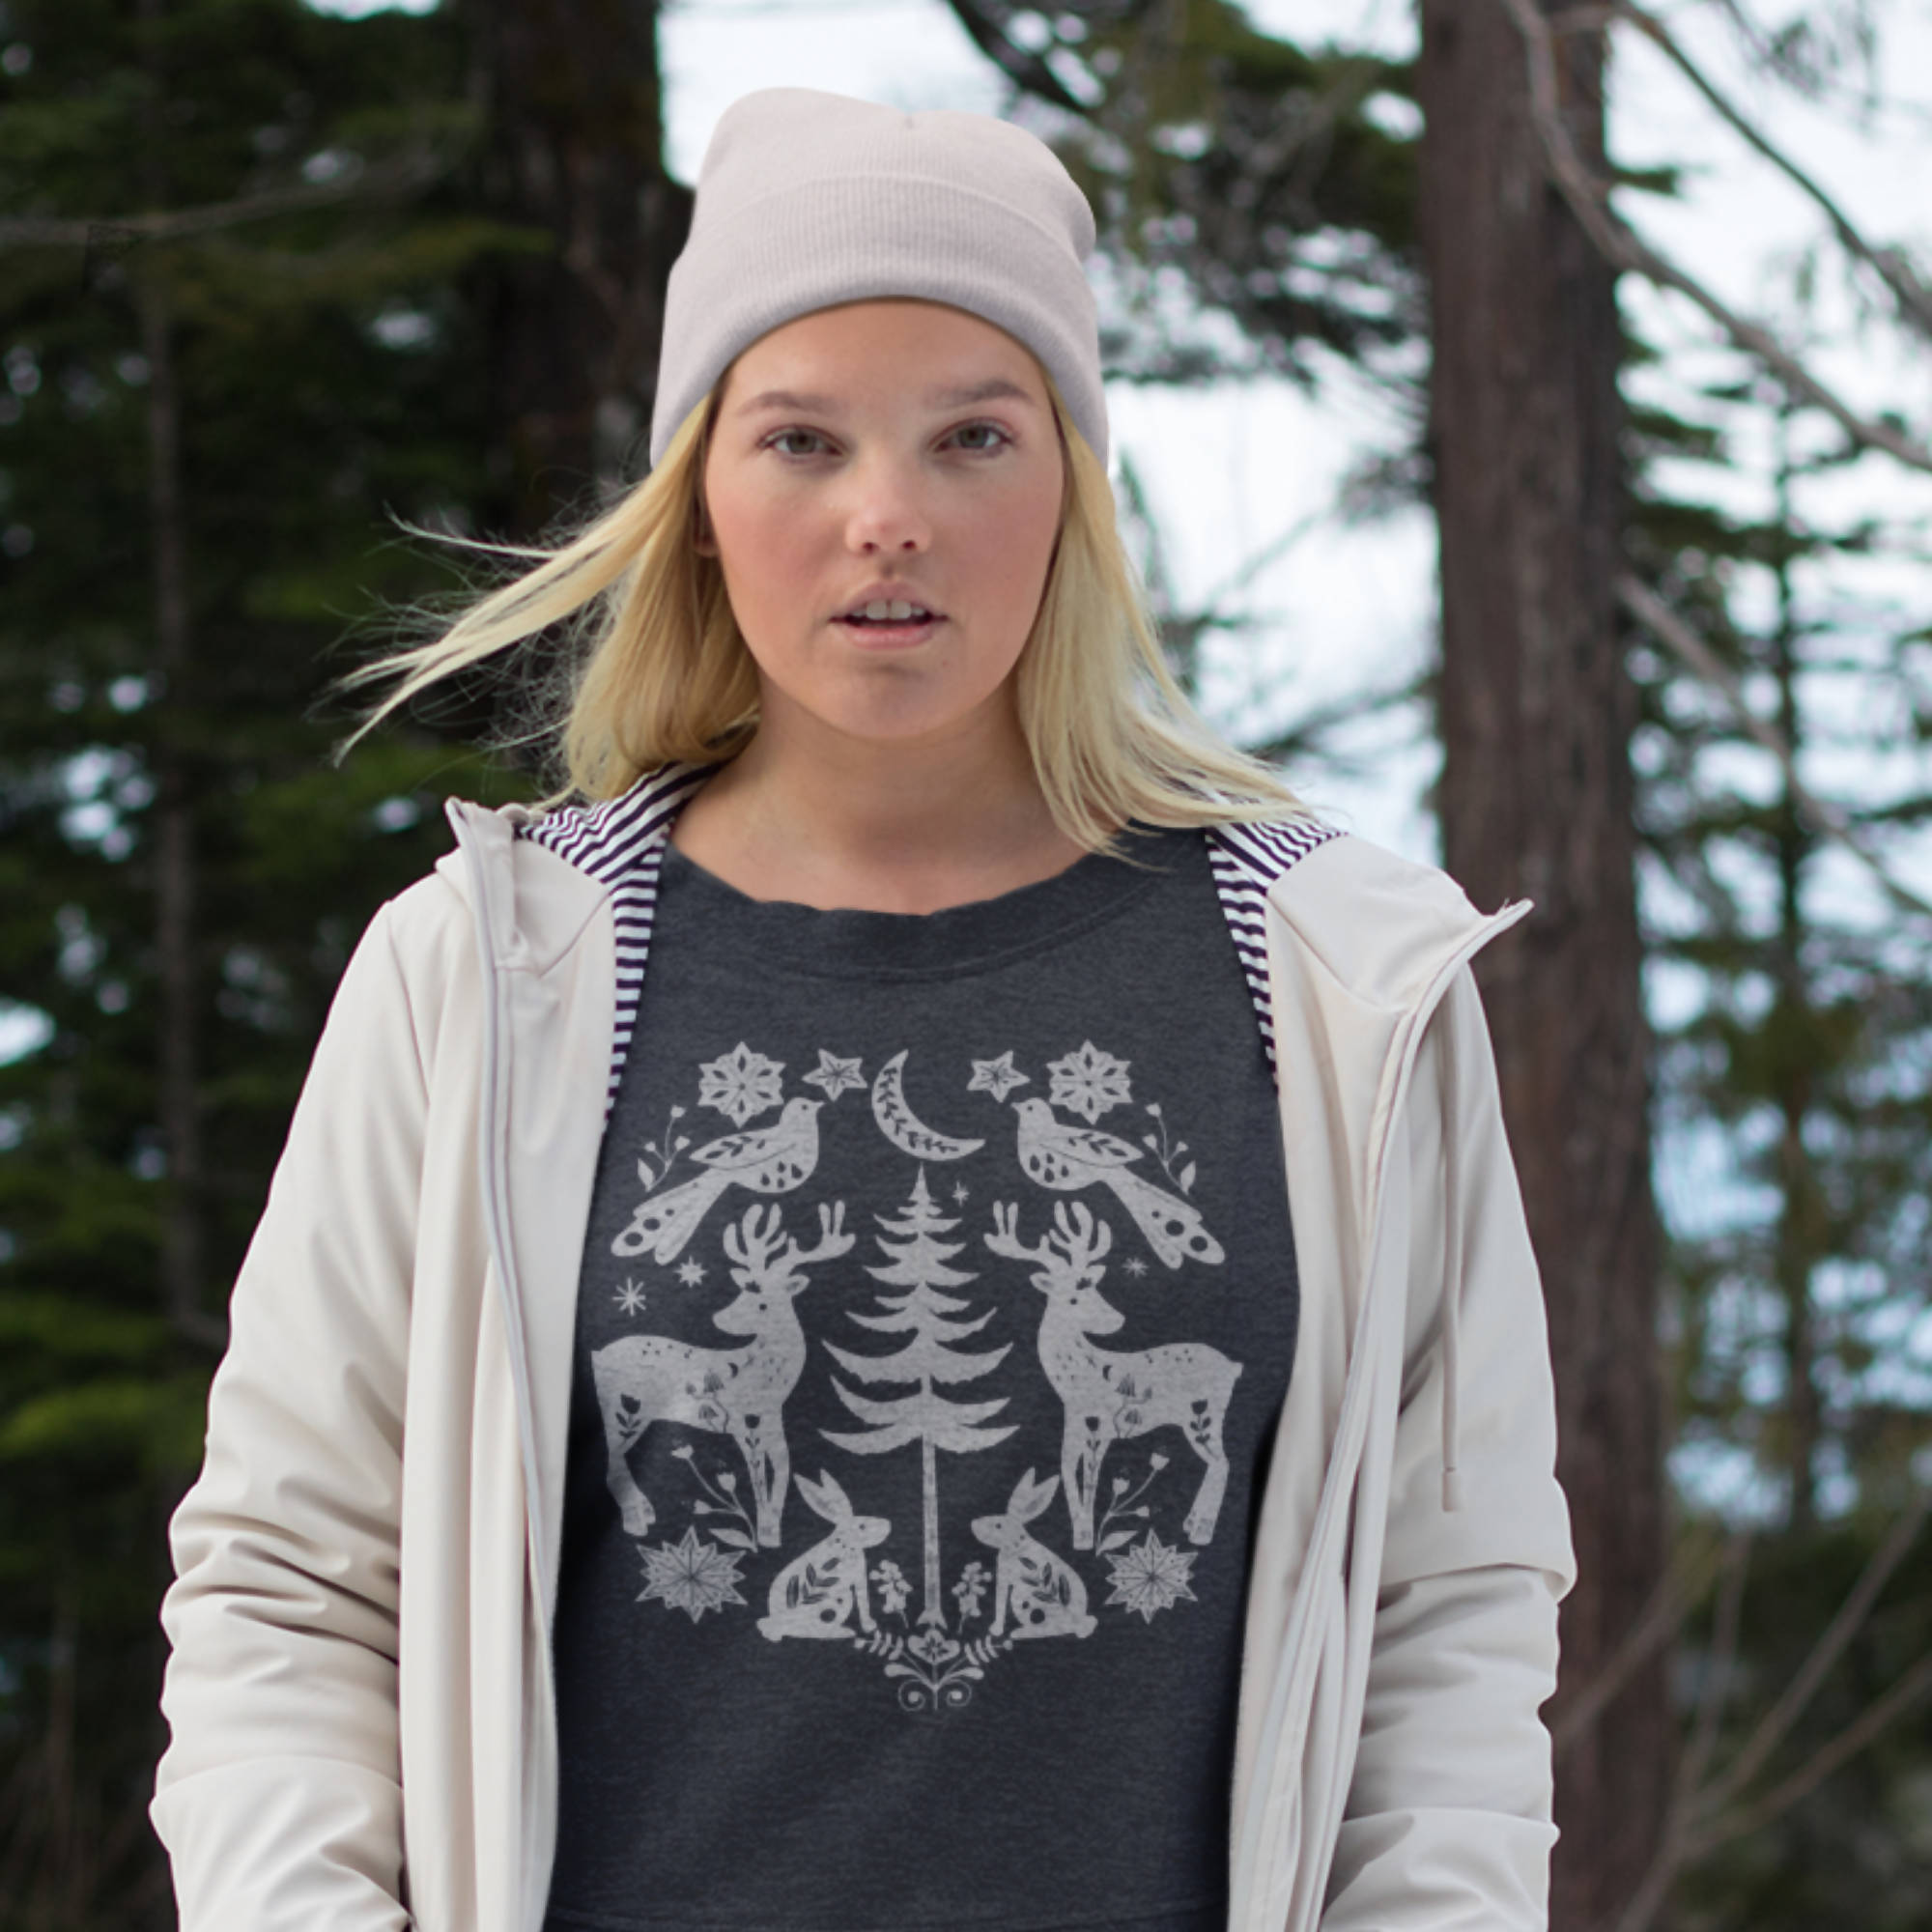 Winter Woods Folk Art Sweatshirt (Made-to-order. Delivered free within 2 weeks)